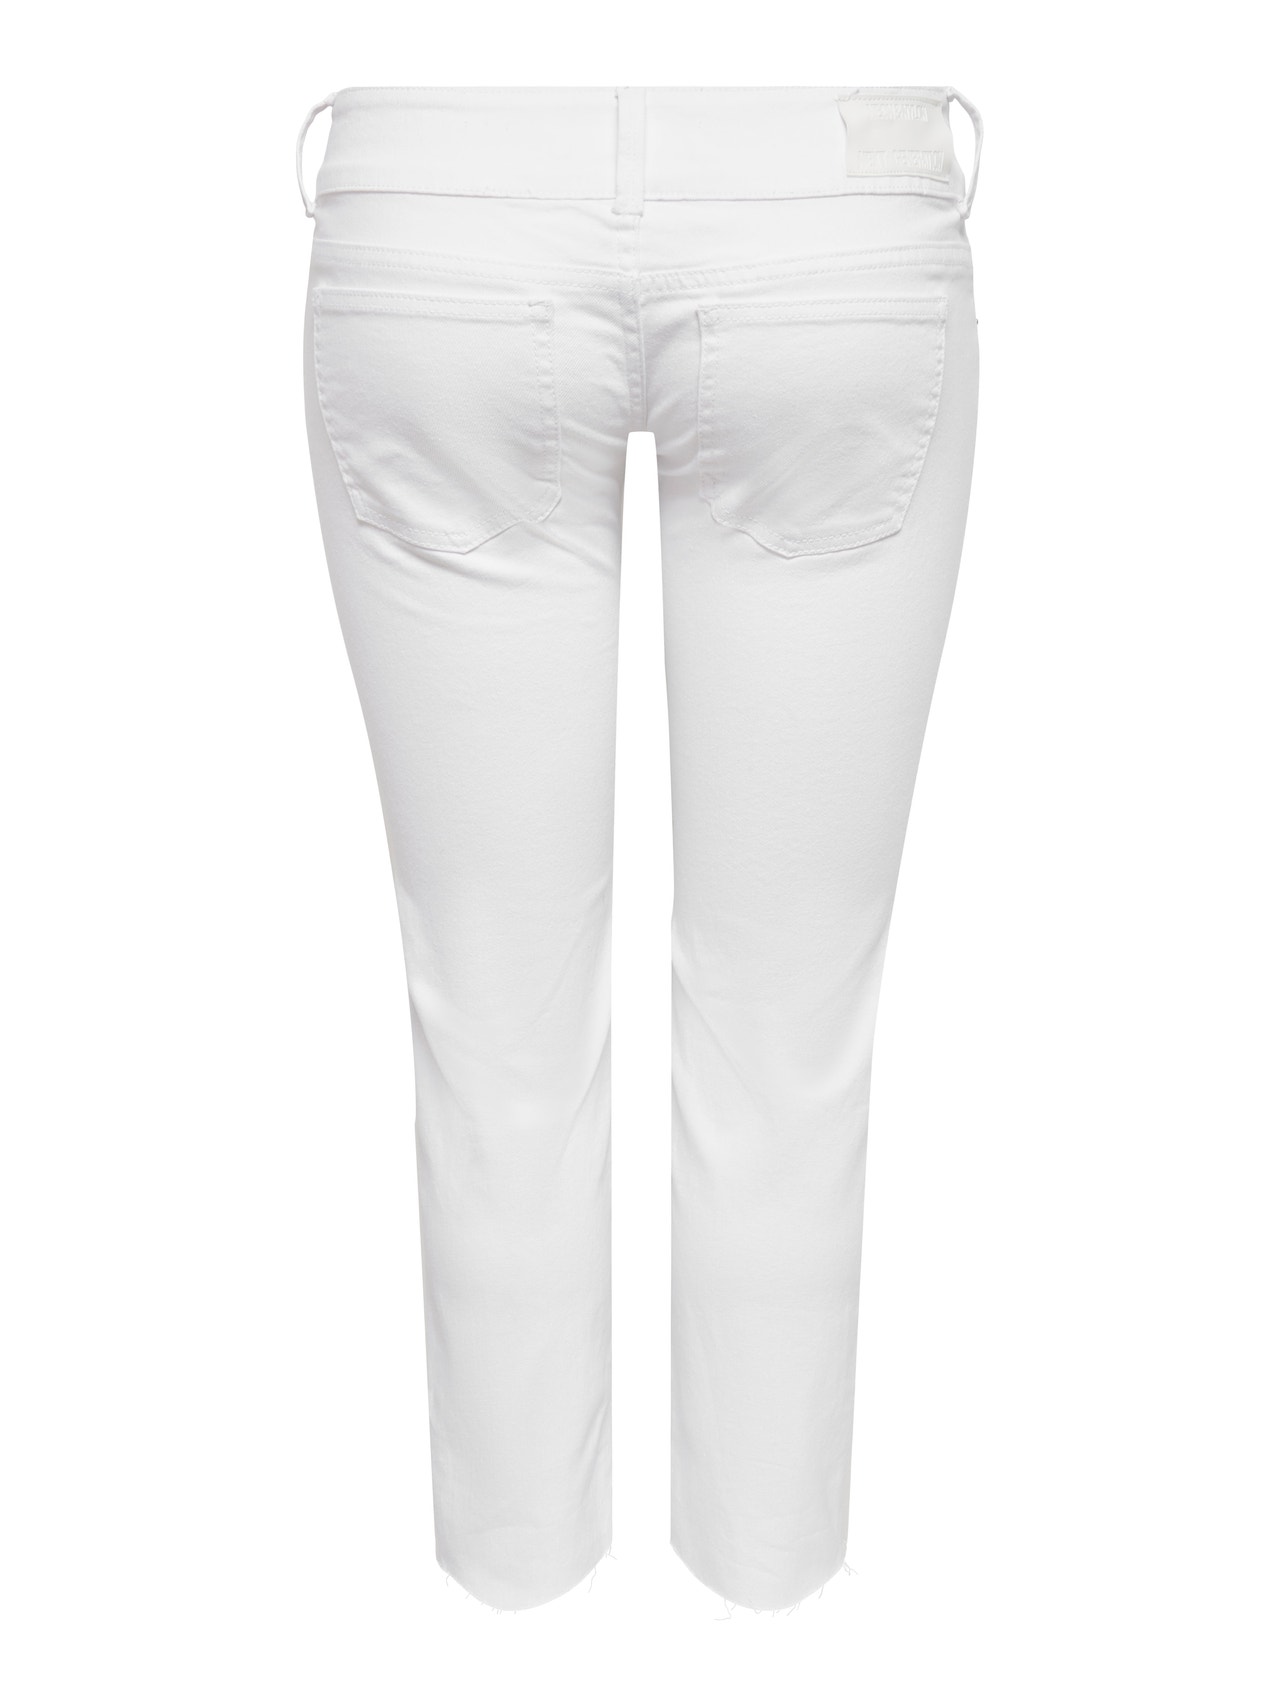 ONLY Jeans Flared Fit Taille extra basse -White - 15267236